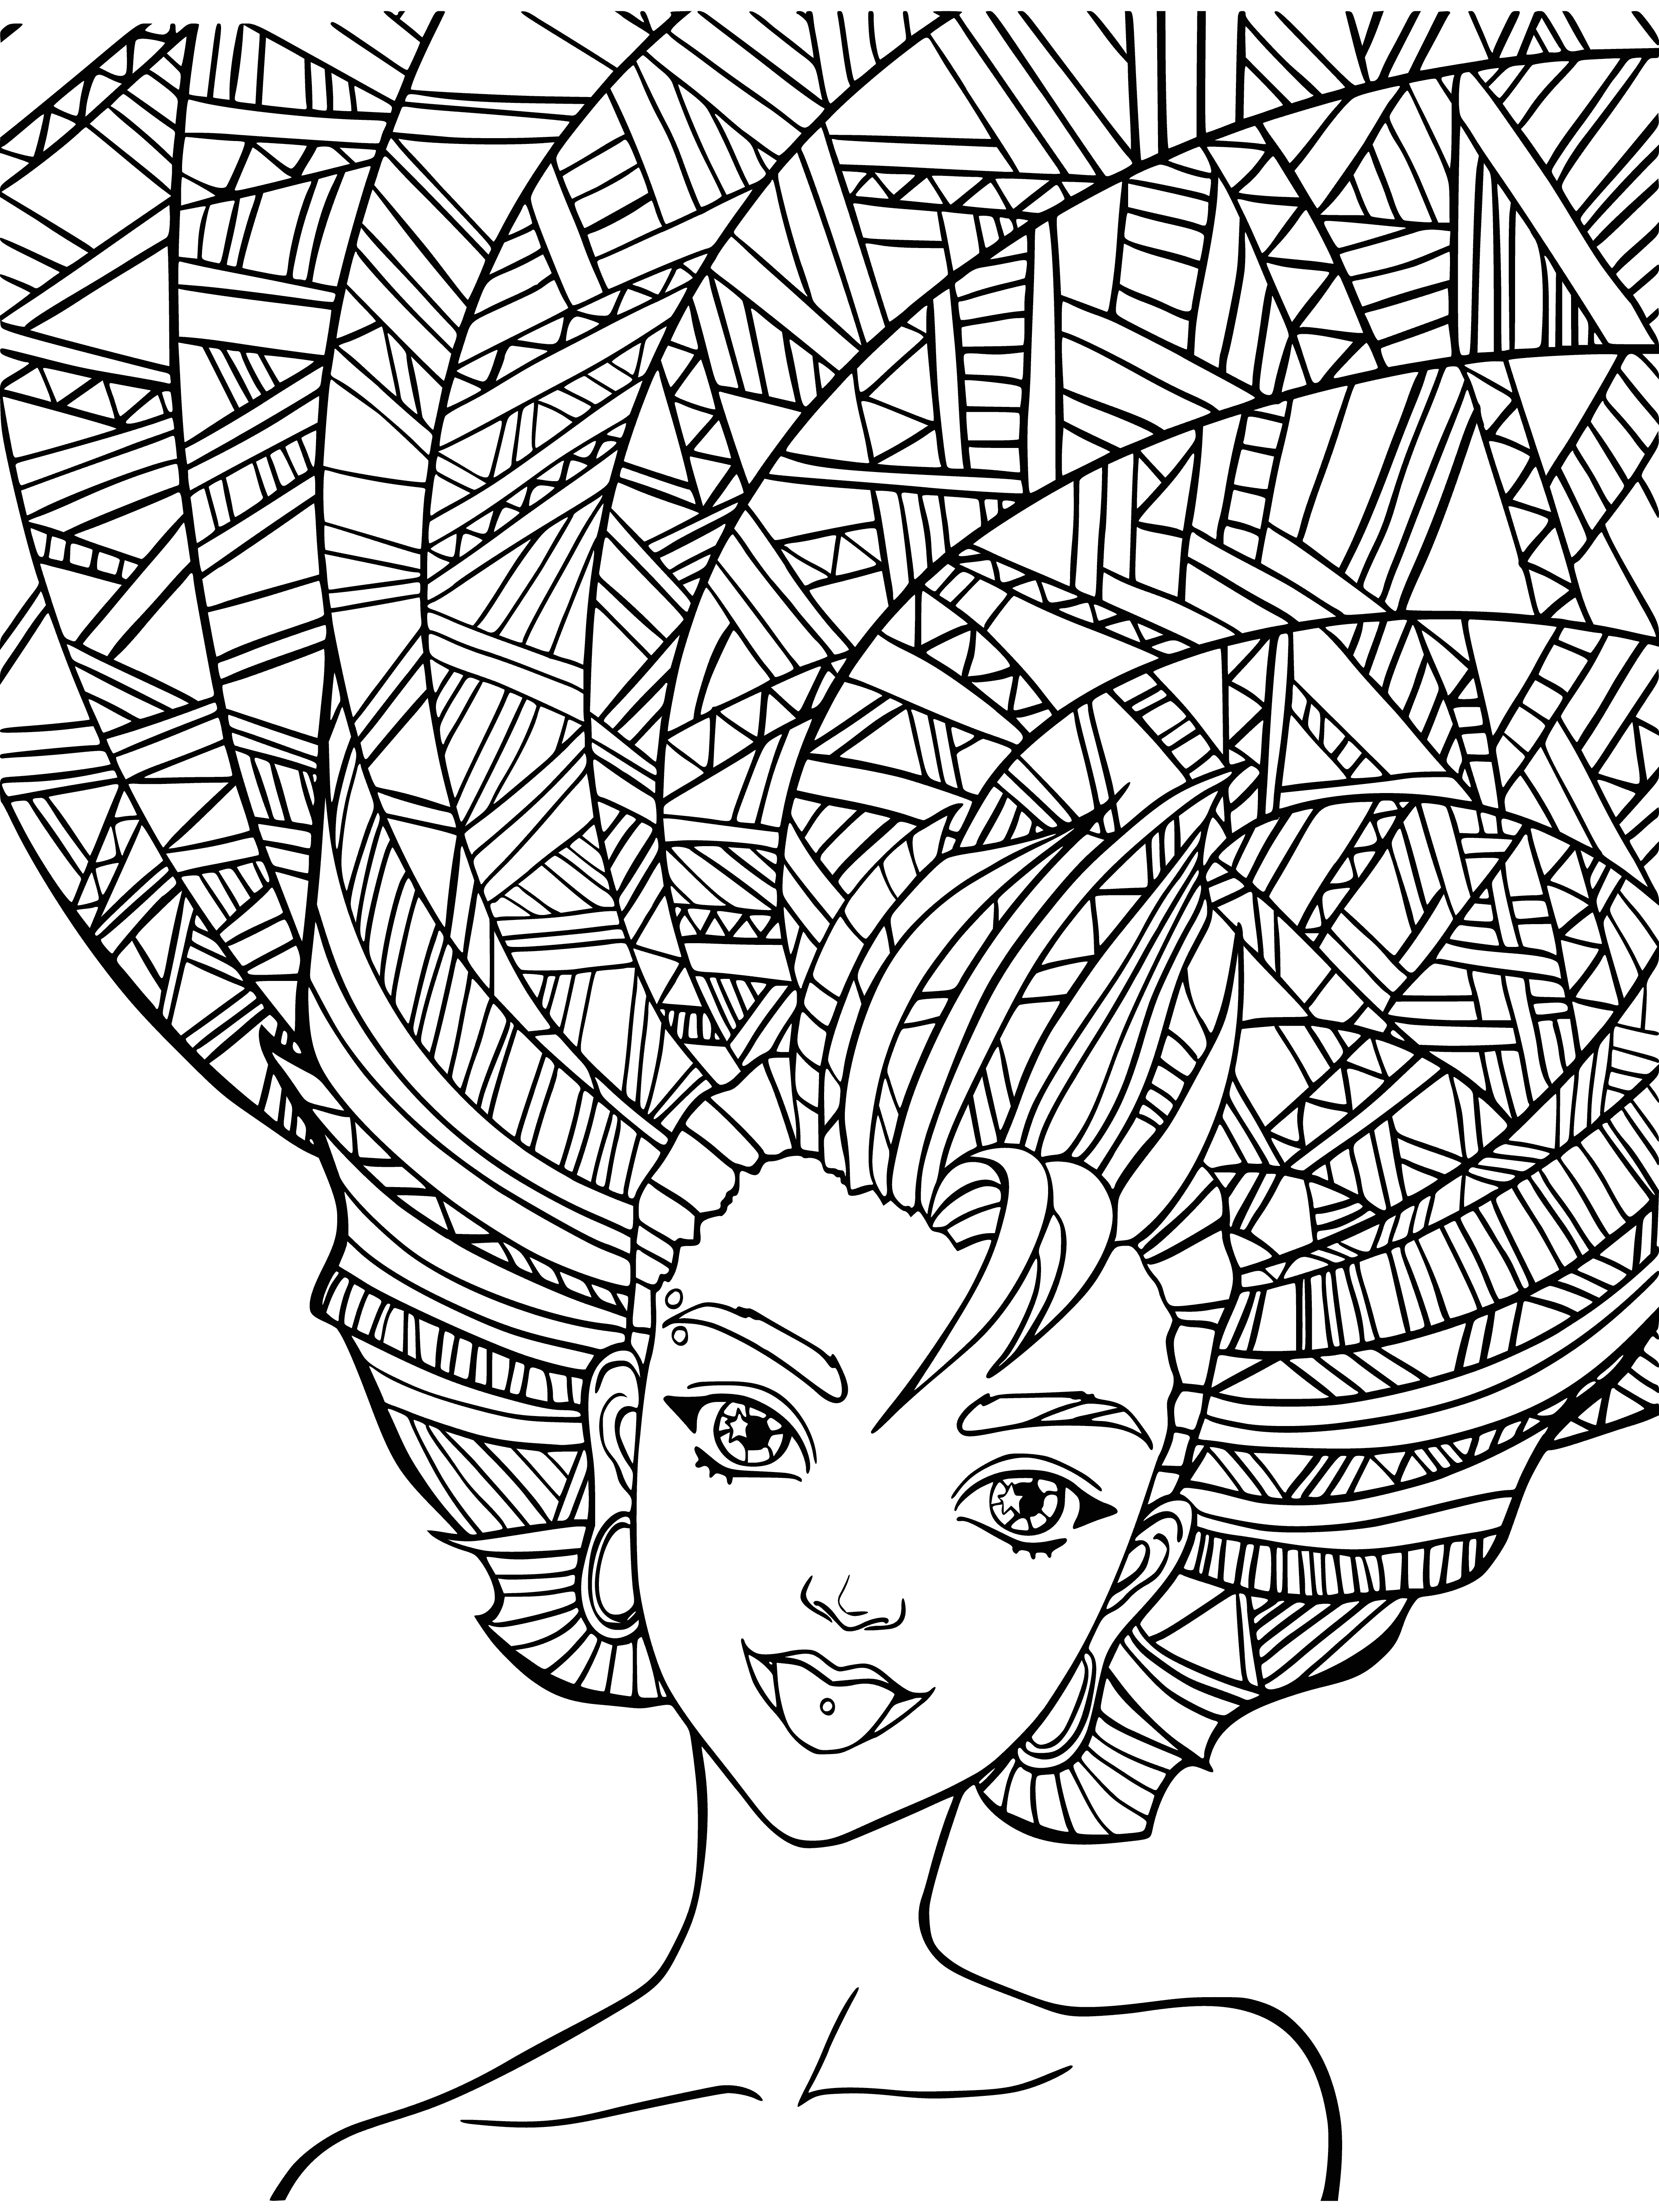 coloring page: Girl has unique hair style: vibrant colors, intricate updo, flowers tucked into hair. Relaxed & happy.